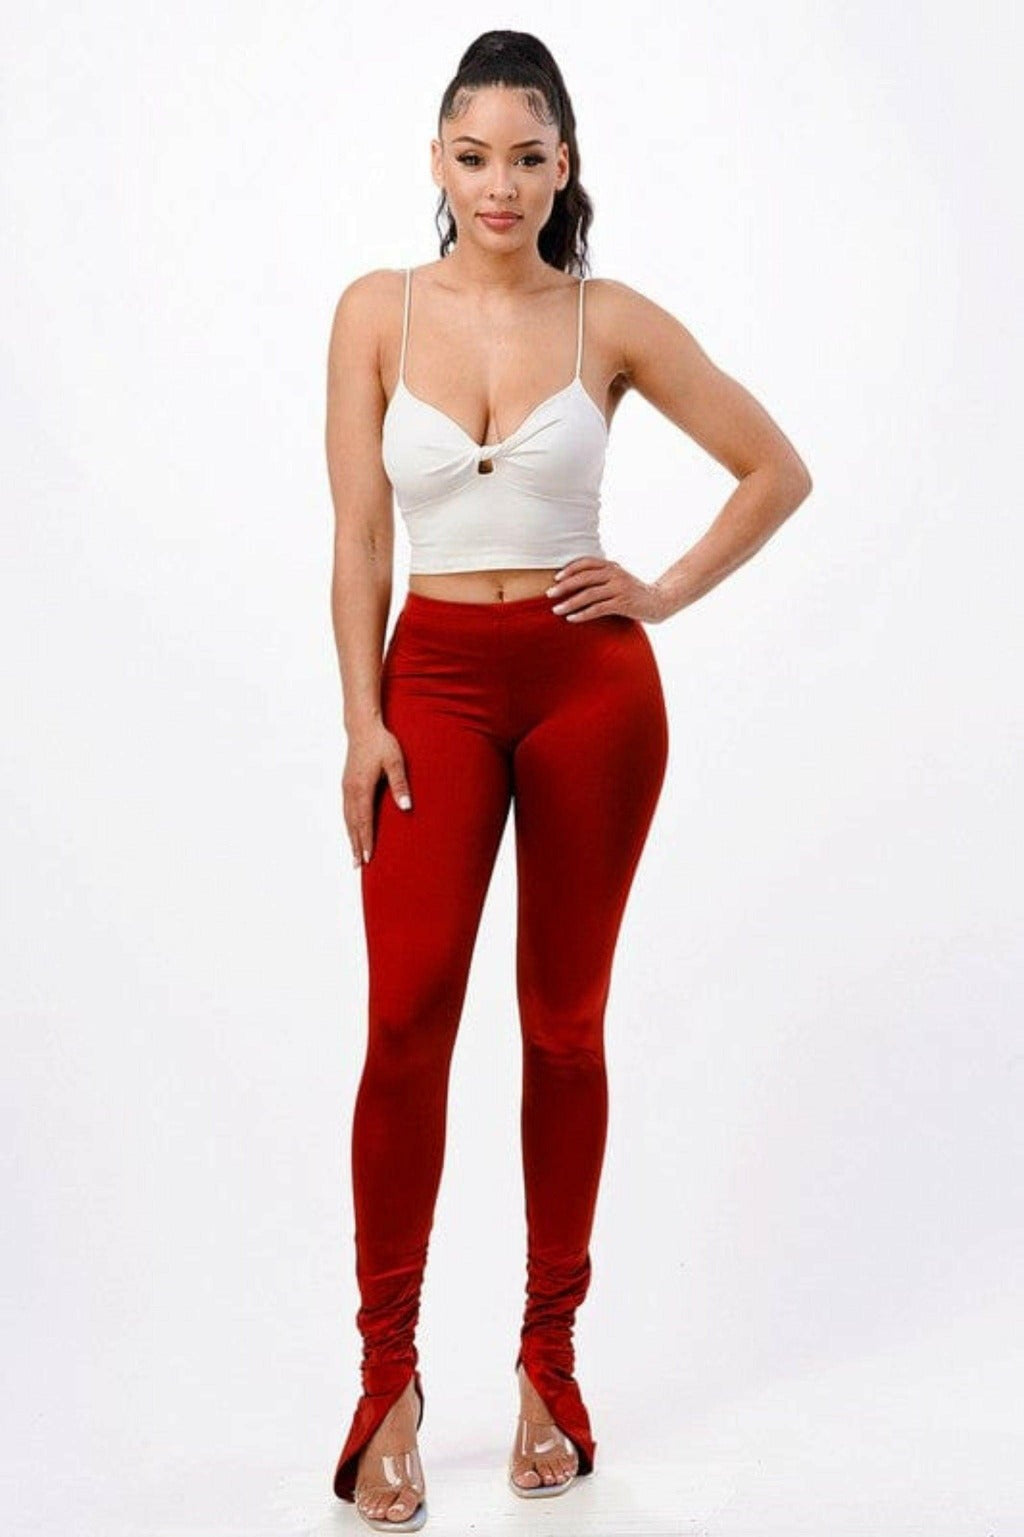 Epicplacess pants Small / RED / UNITED STATES Ruched SATEEN RUCHED HEM PANTS P18346